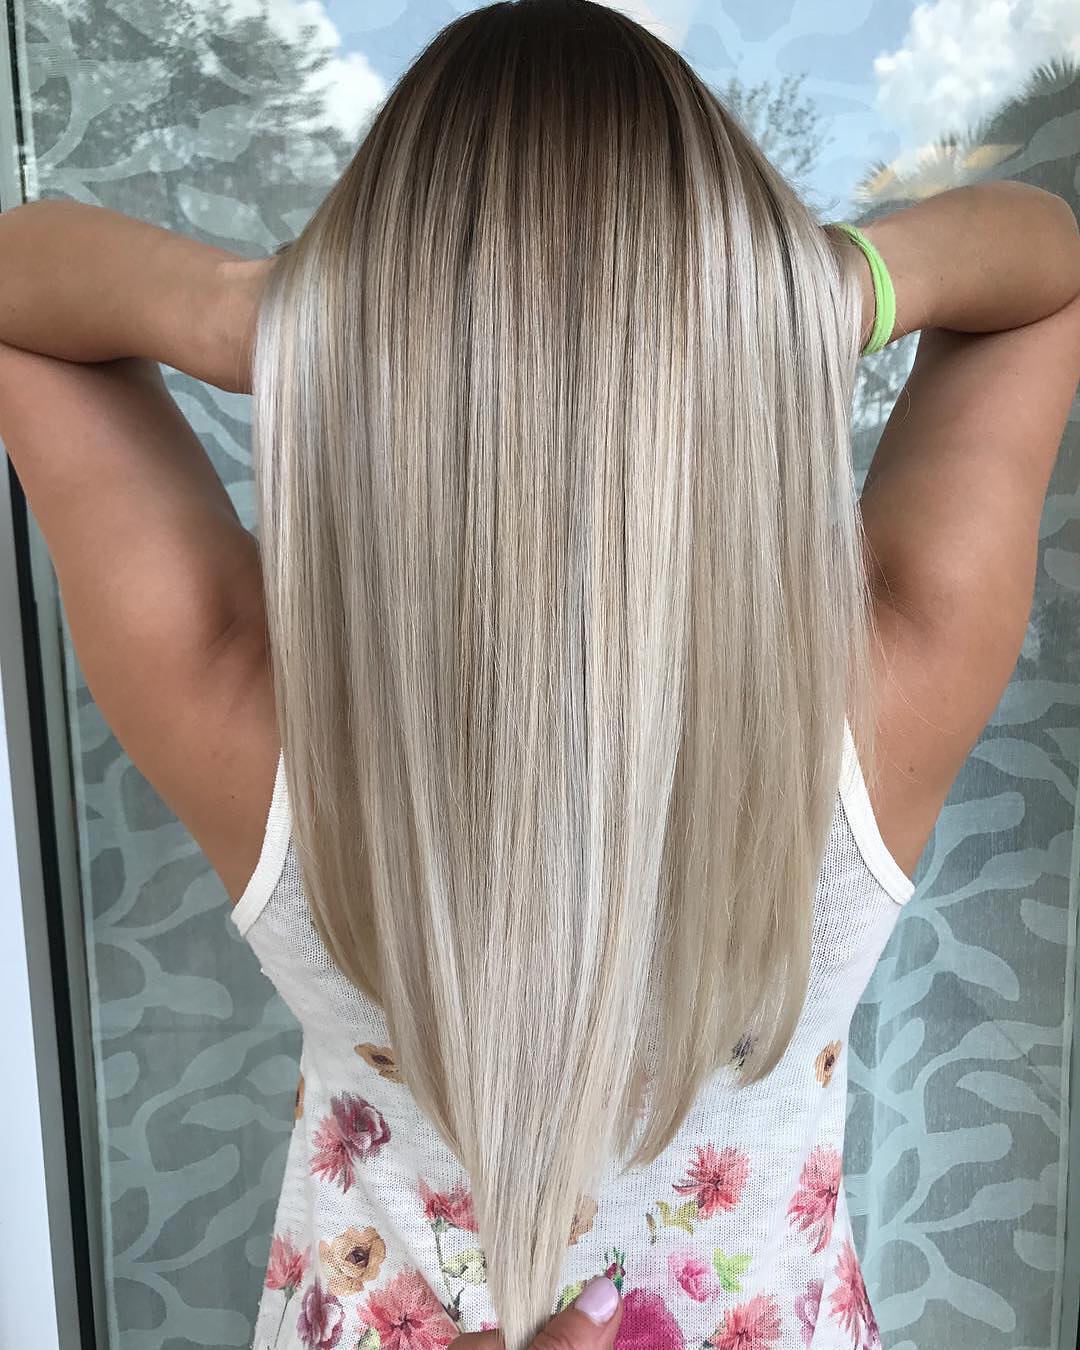 Straight-Blonde-Hair 21 Hair Color Trends 2020 to Glam Up Your Tresses 